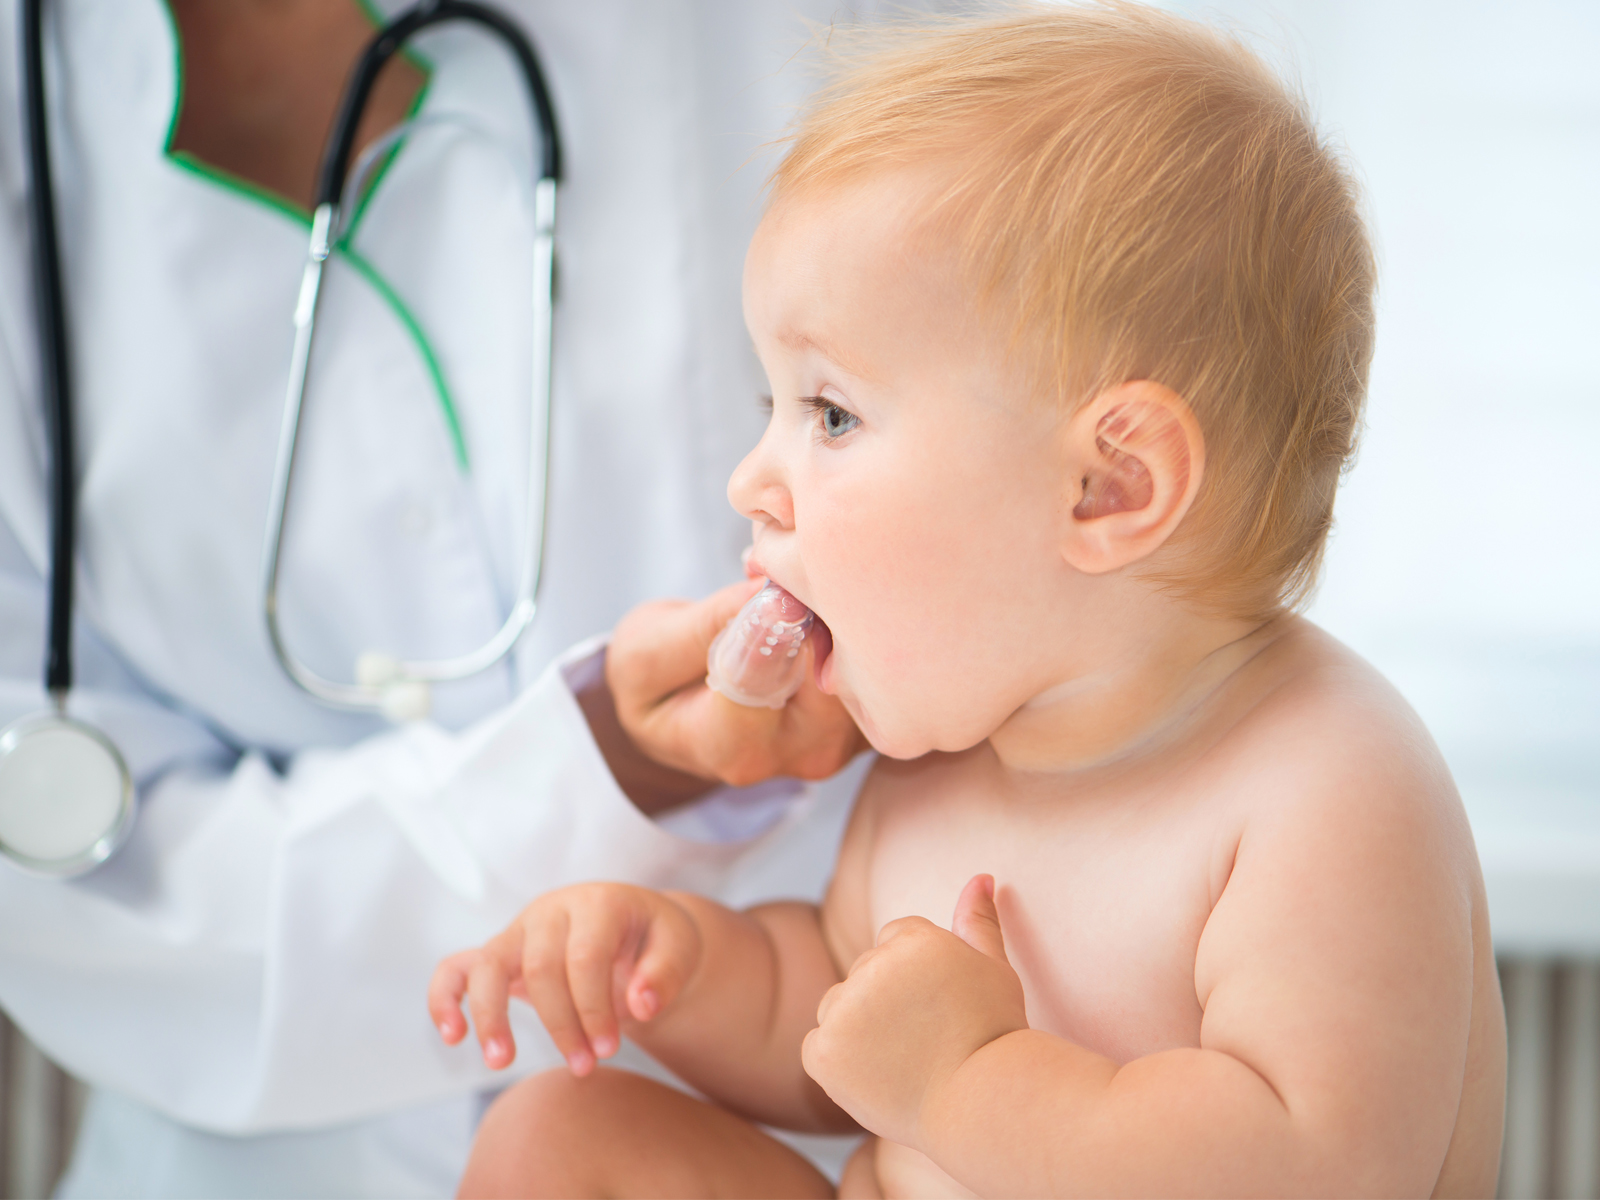 How to Prevent tooth decay in babies?